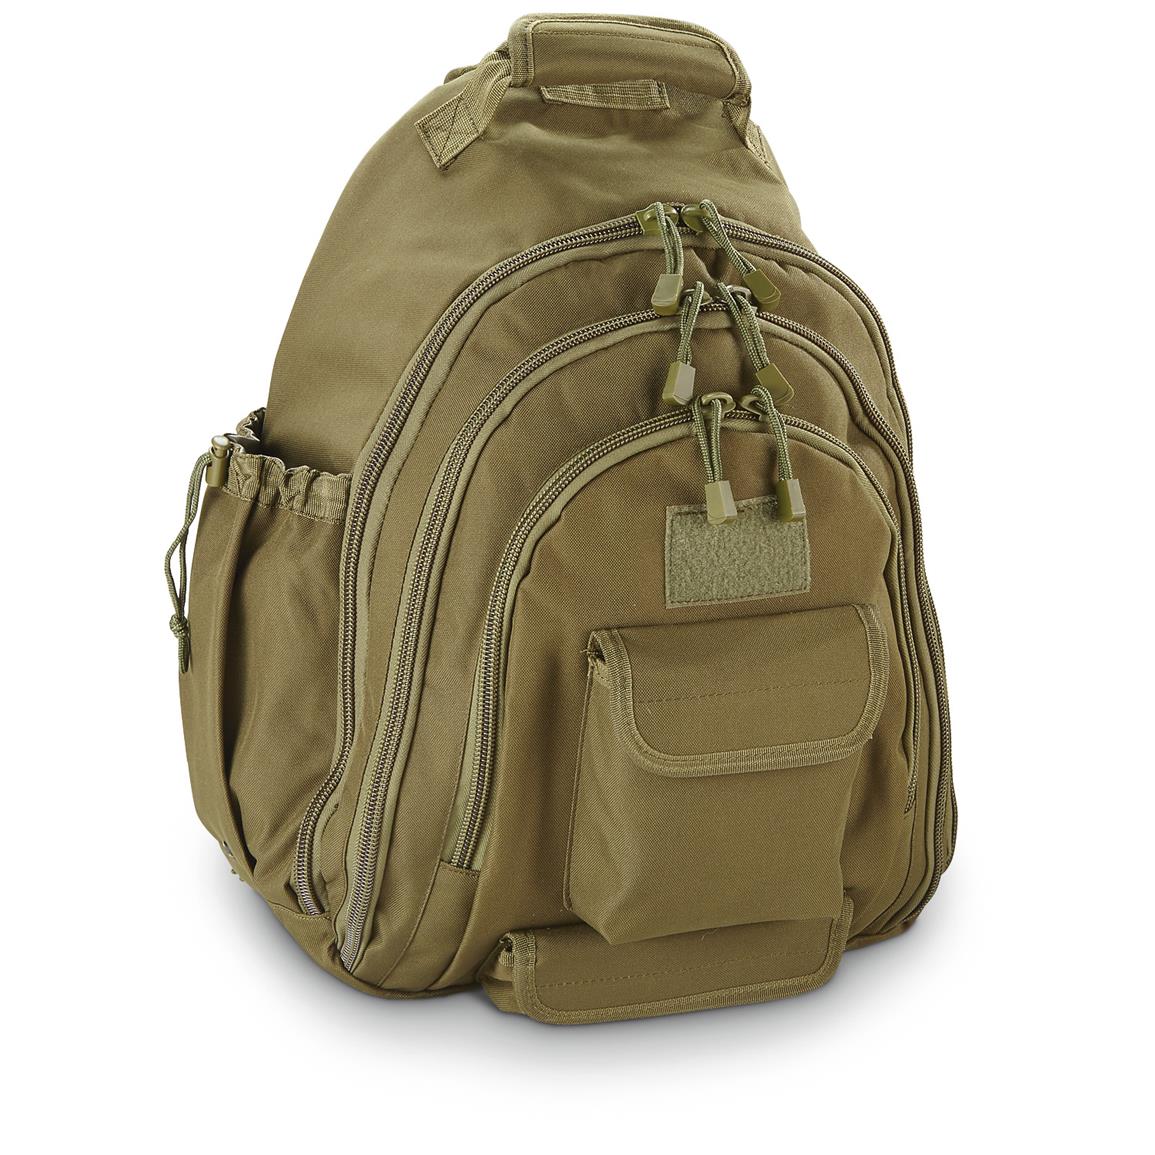 5ive Star Gear Tactical Solo Sling Bag - 651614, Military Style ...